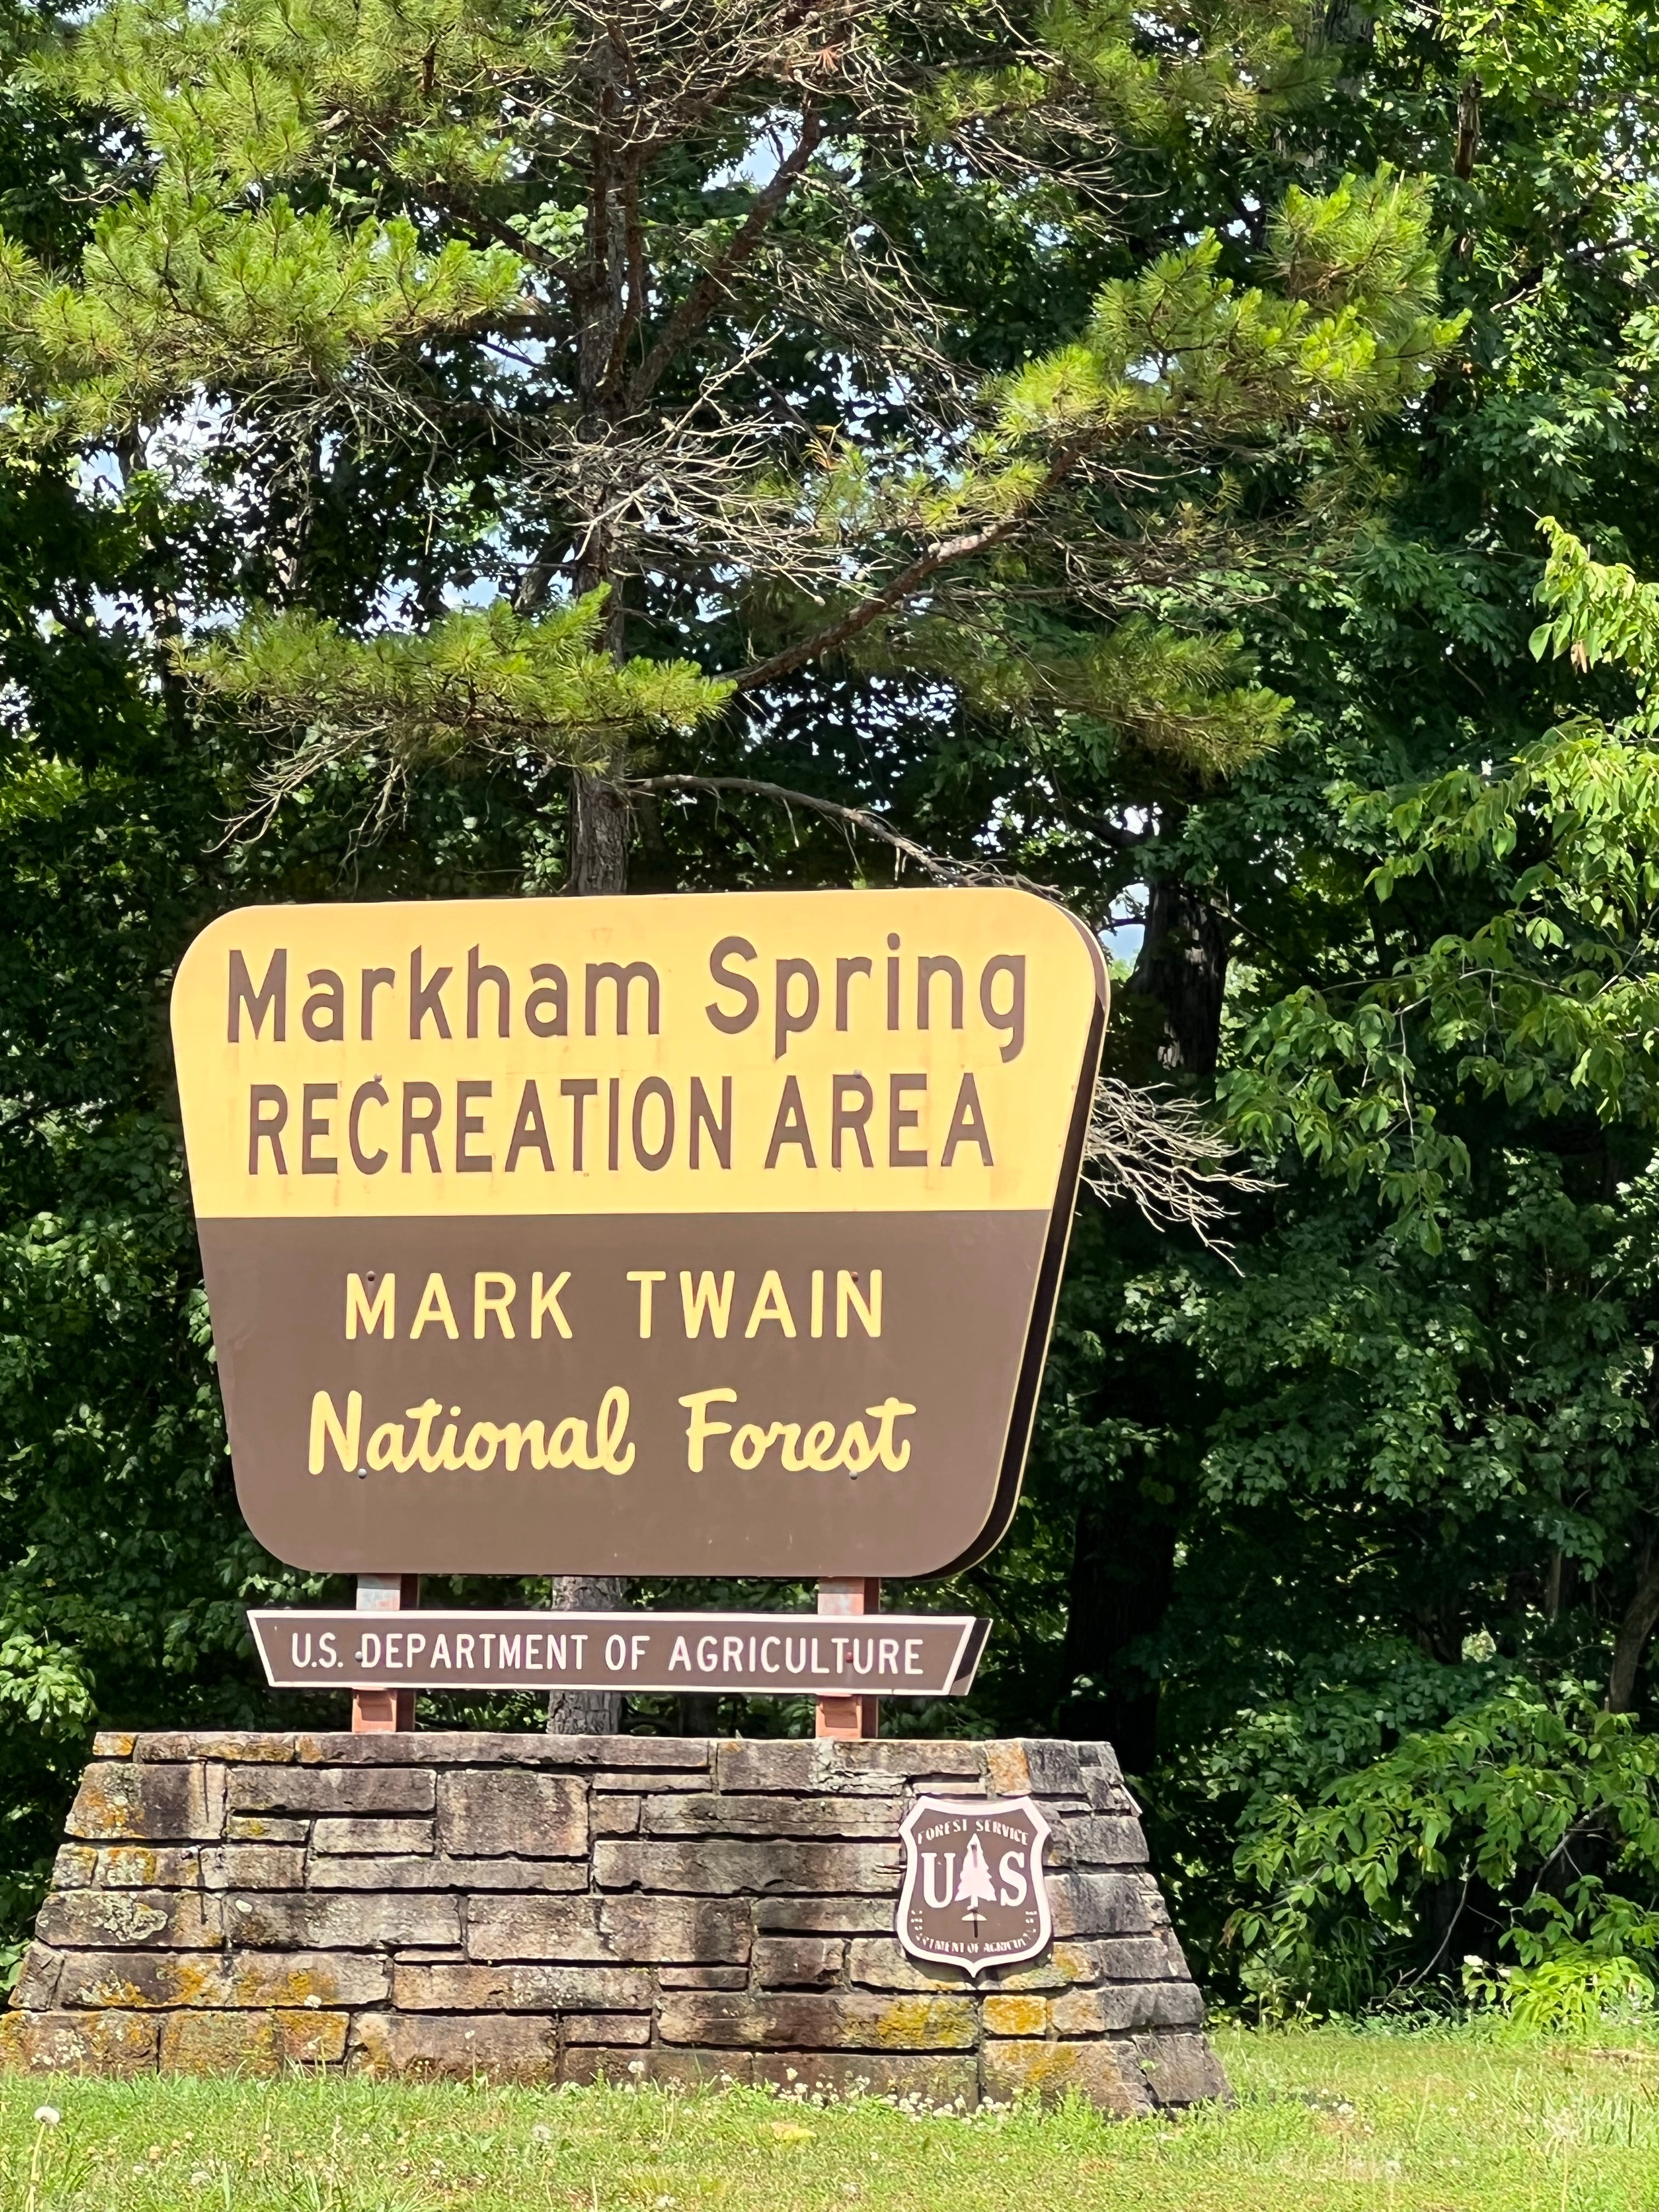 Camper submitted image from Mark Twain National Forest Markham Springs Recreation Area - 1